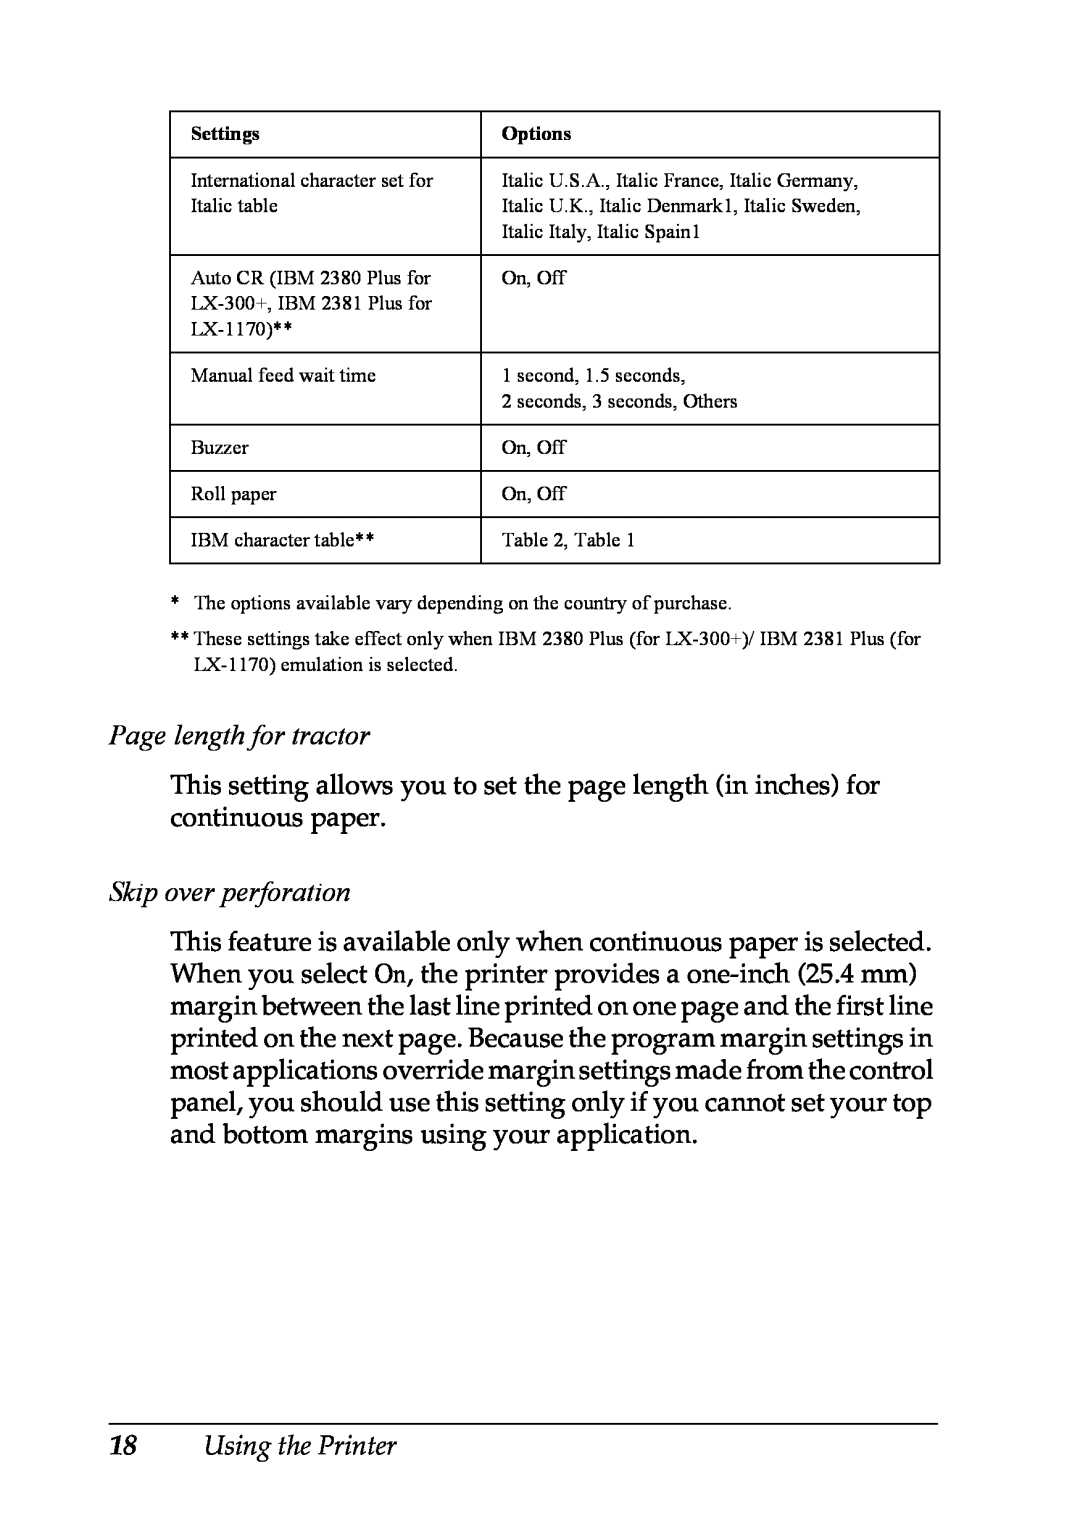 Epson LX-1170 manual Page length for tractor, Skip over perforation, Using the Printer 